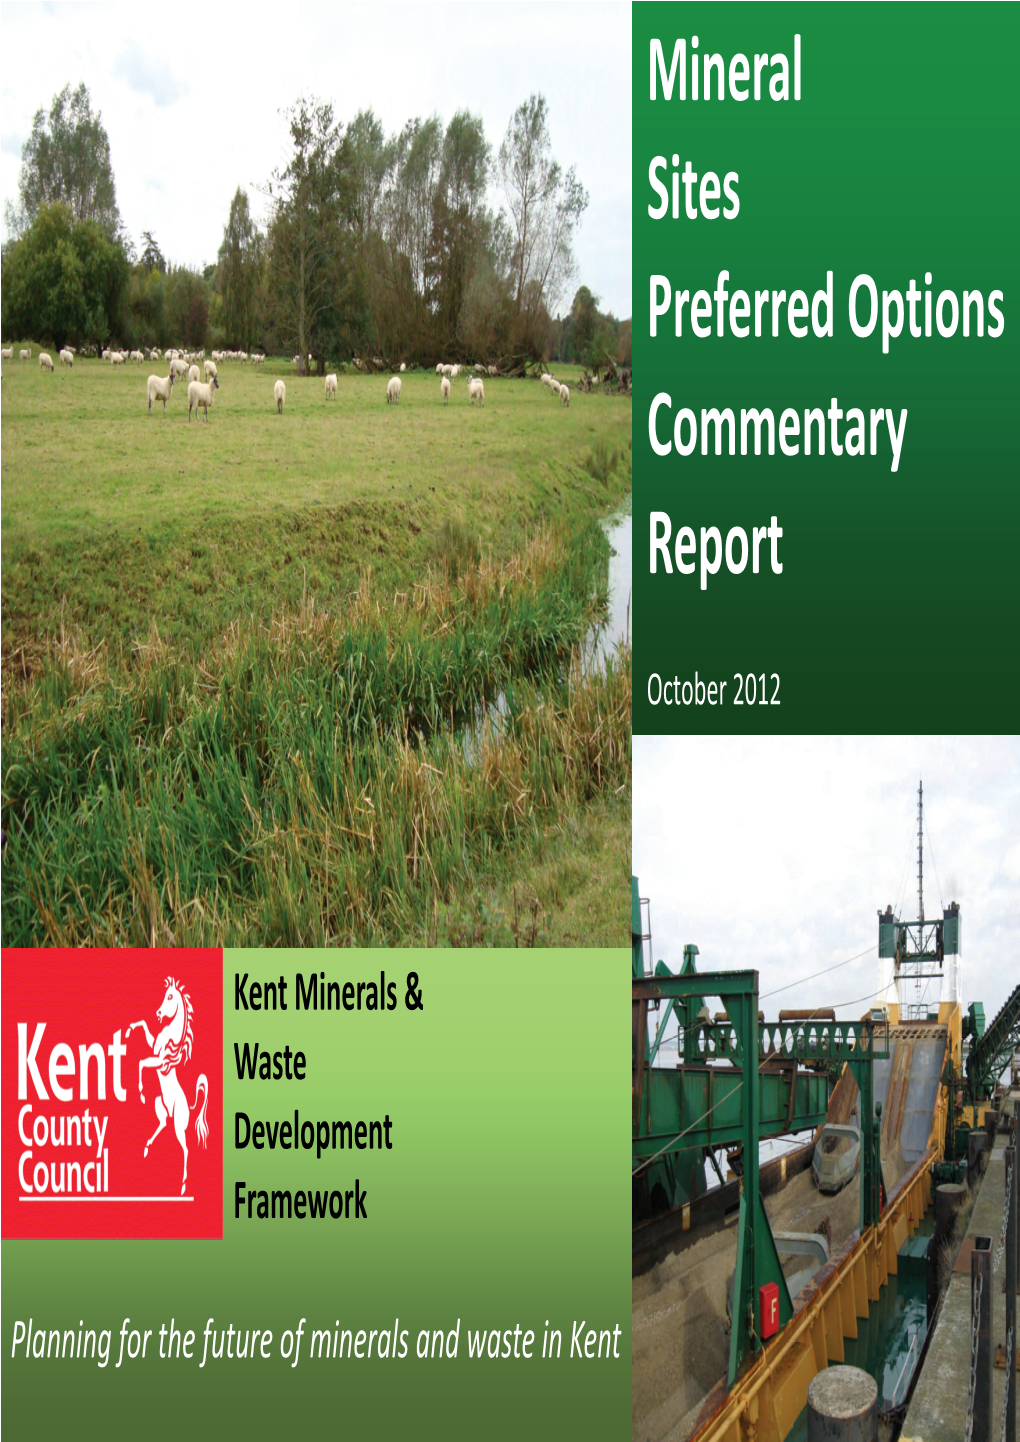 Mineral Sites Preferred Options Commentary Report